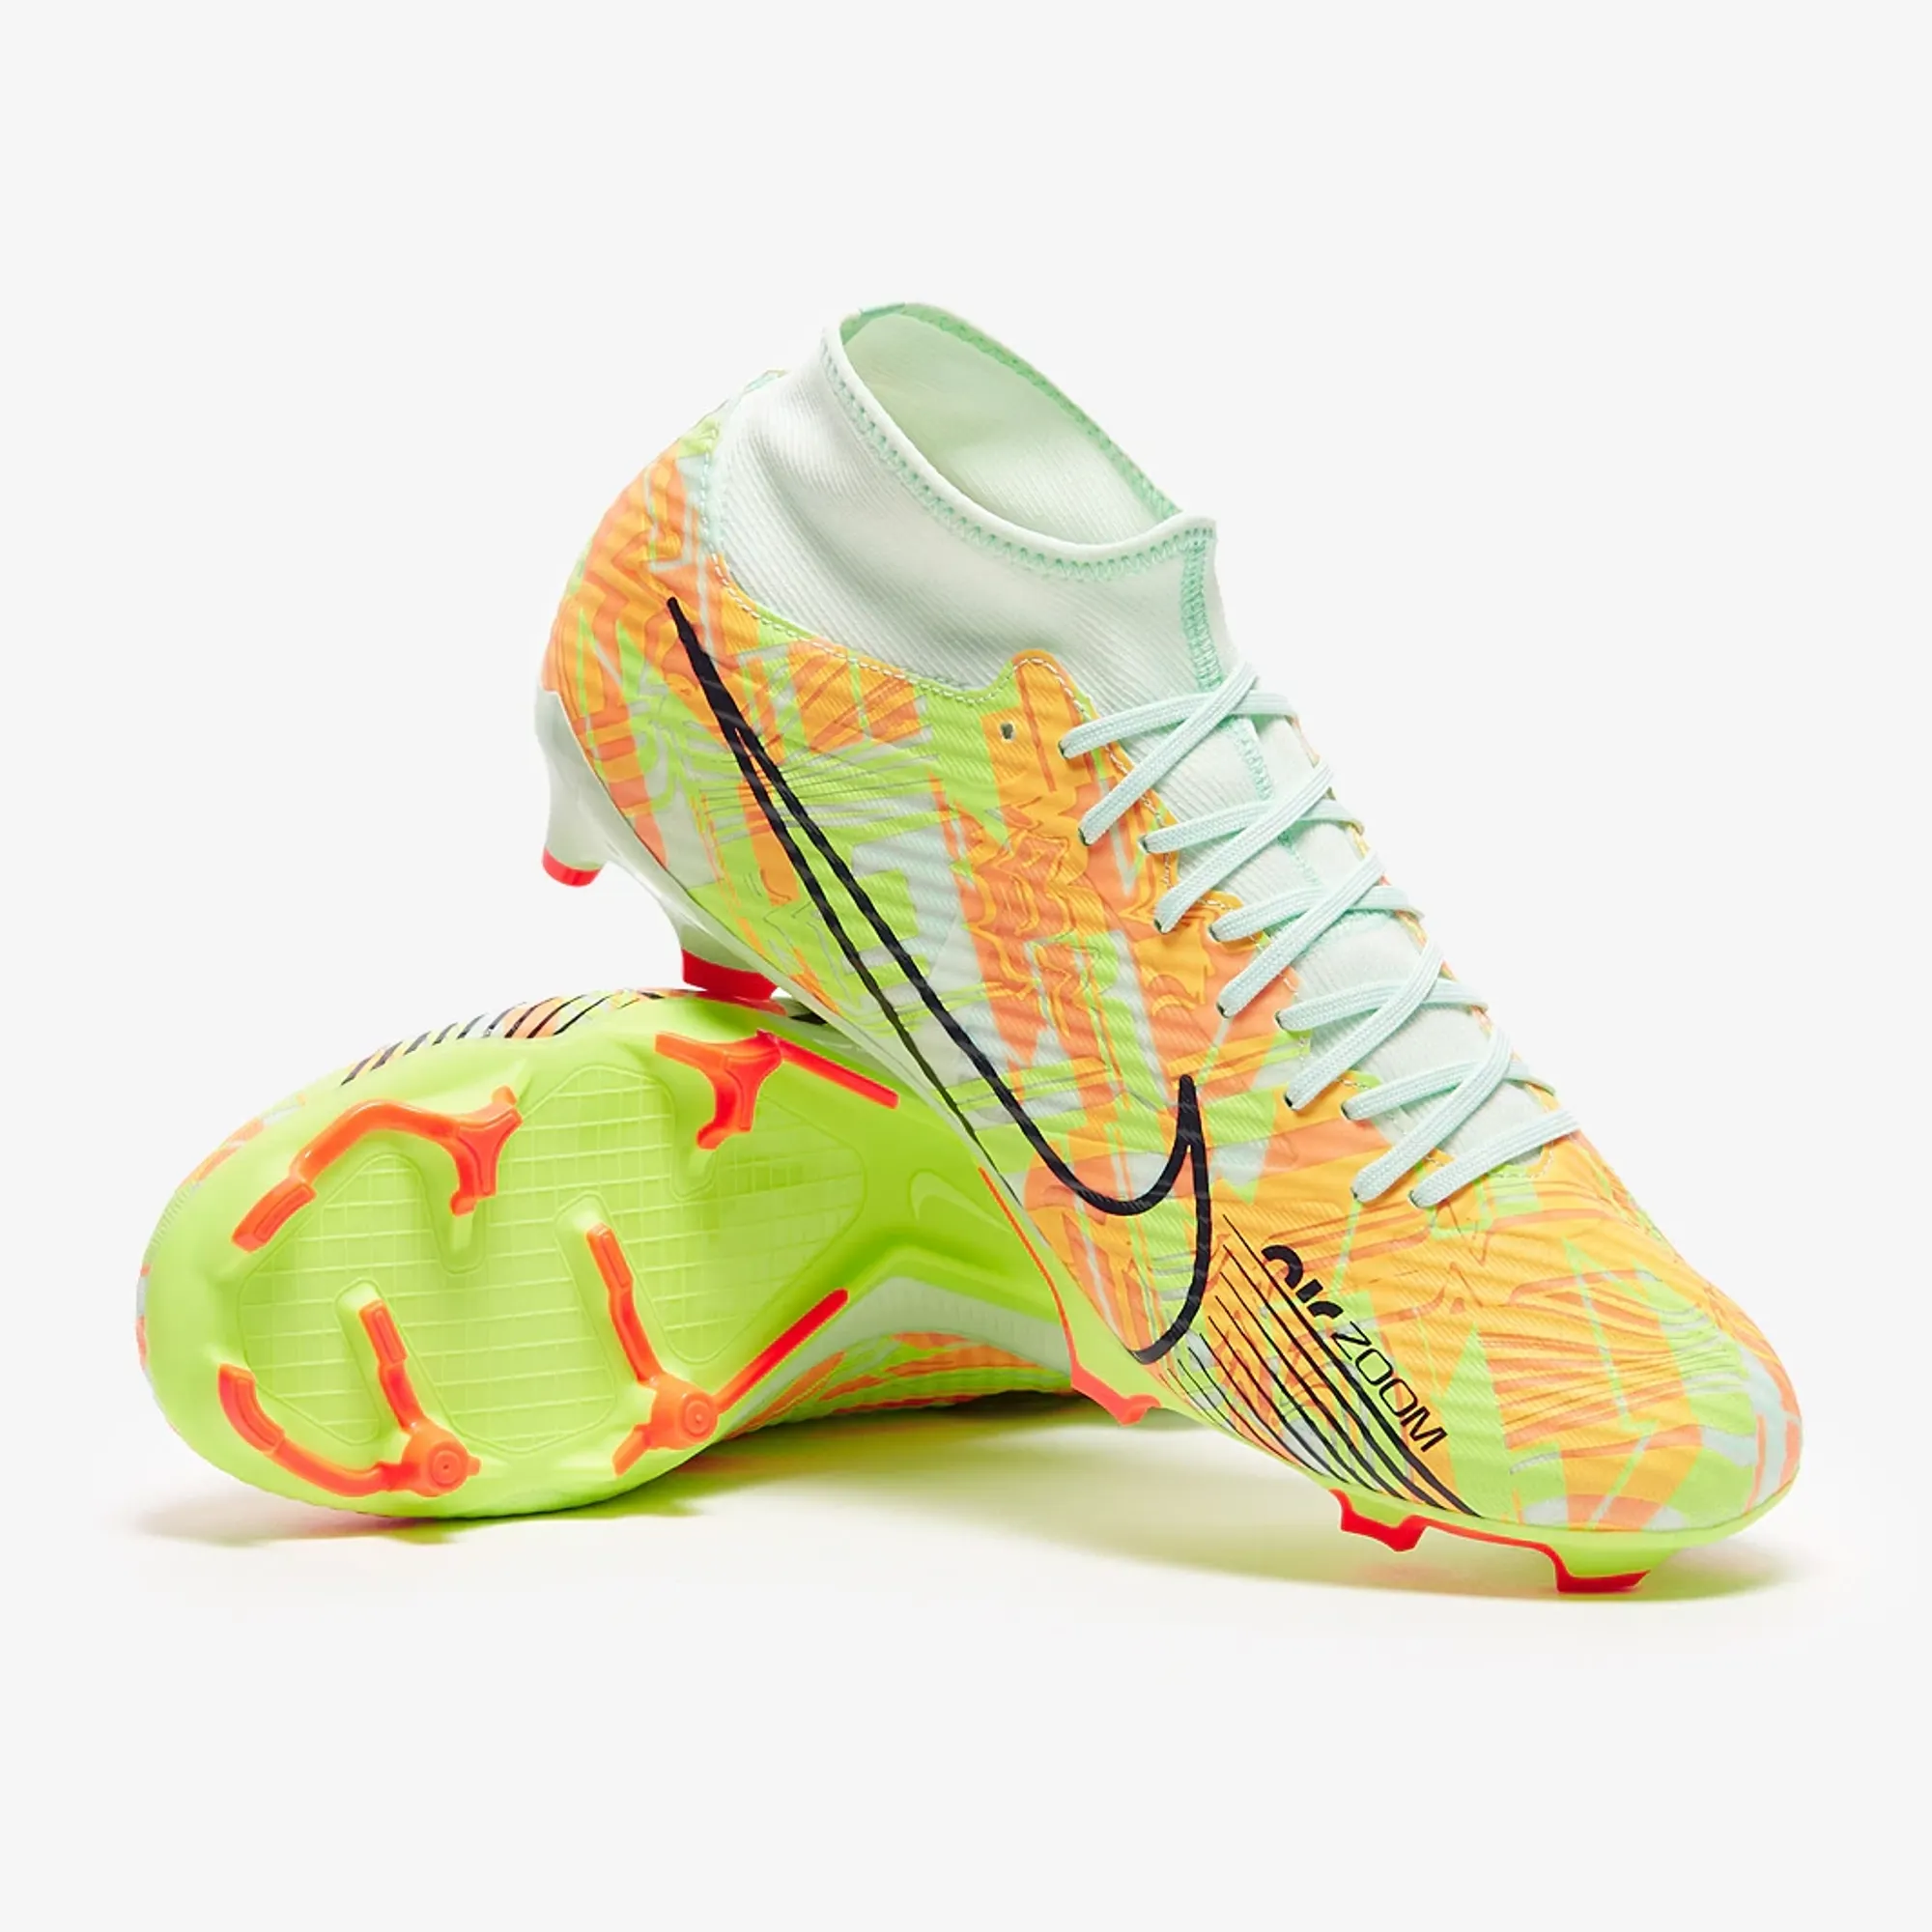 Nike Football & Fitness Store Online India| Nike Shoes & Apparel